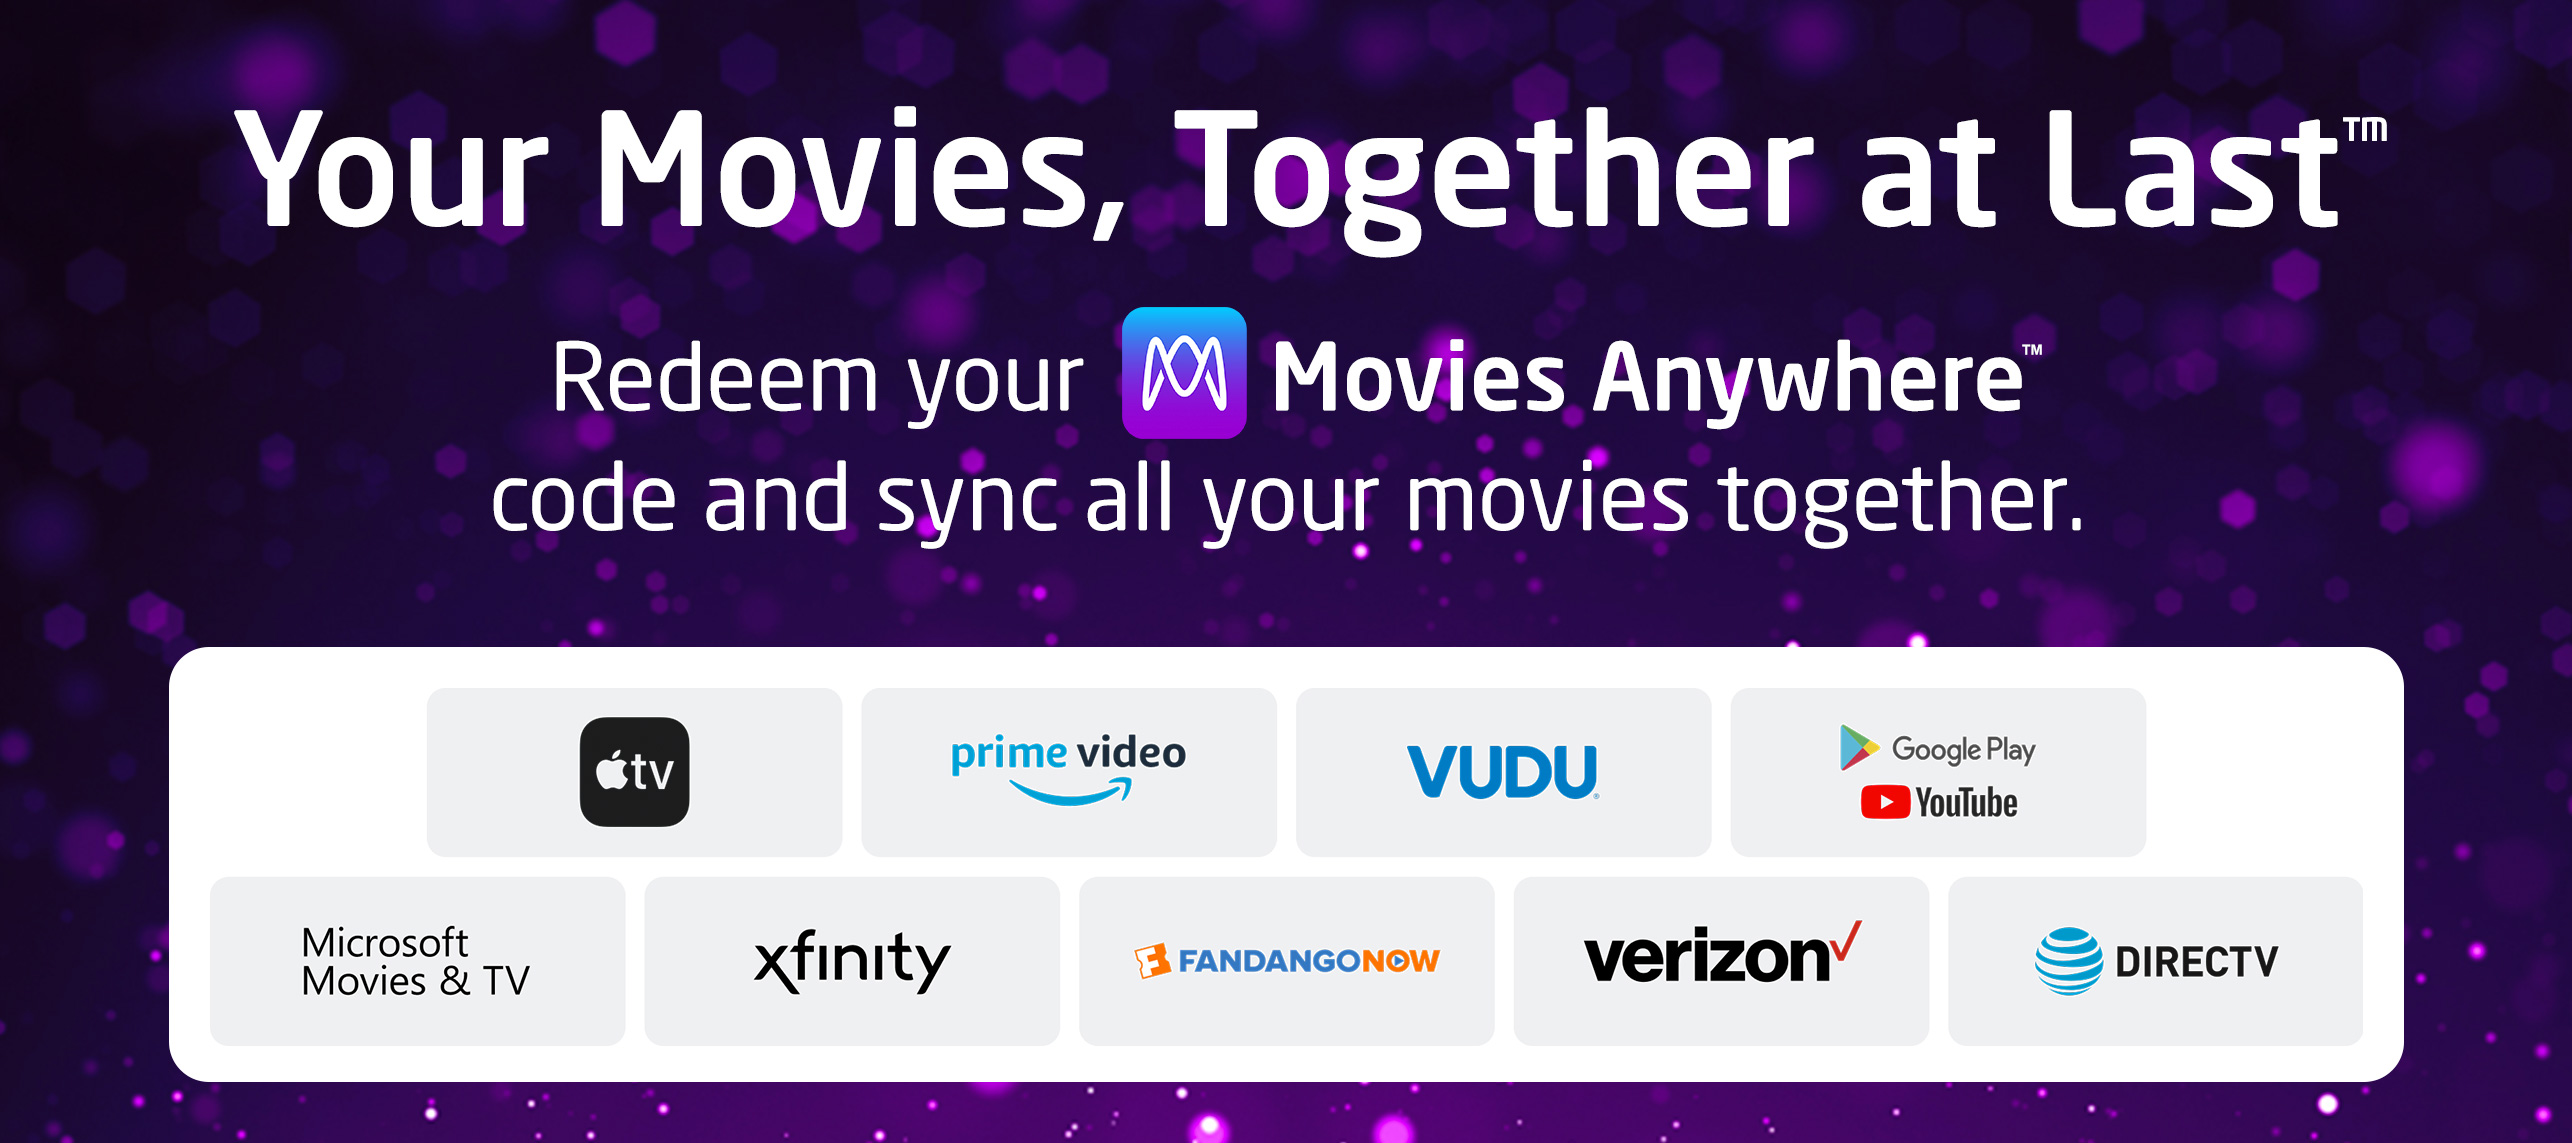 Movie Anywhere Your Movies Together at Last